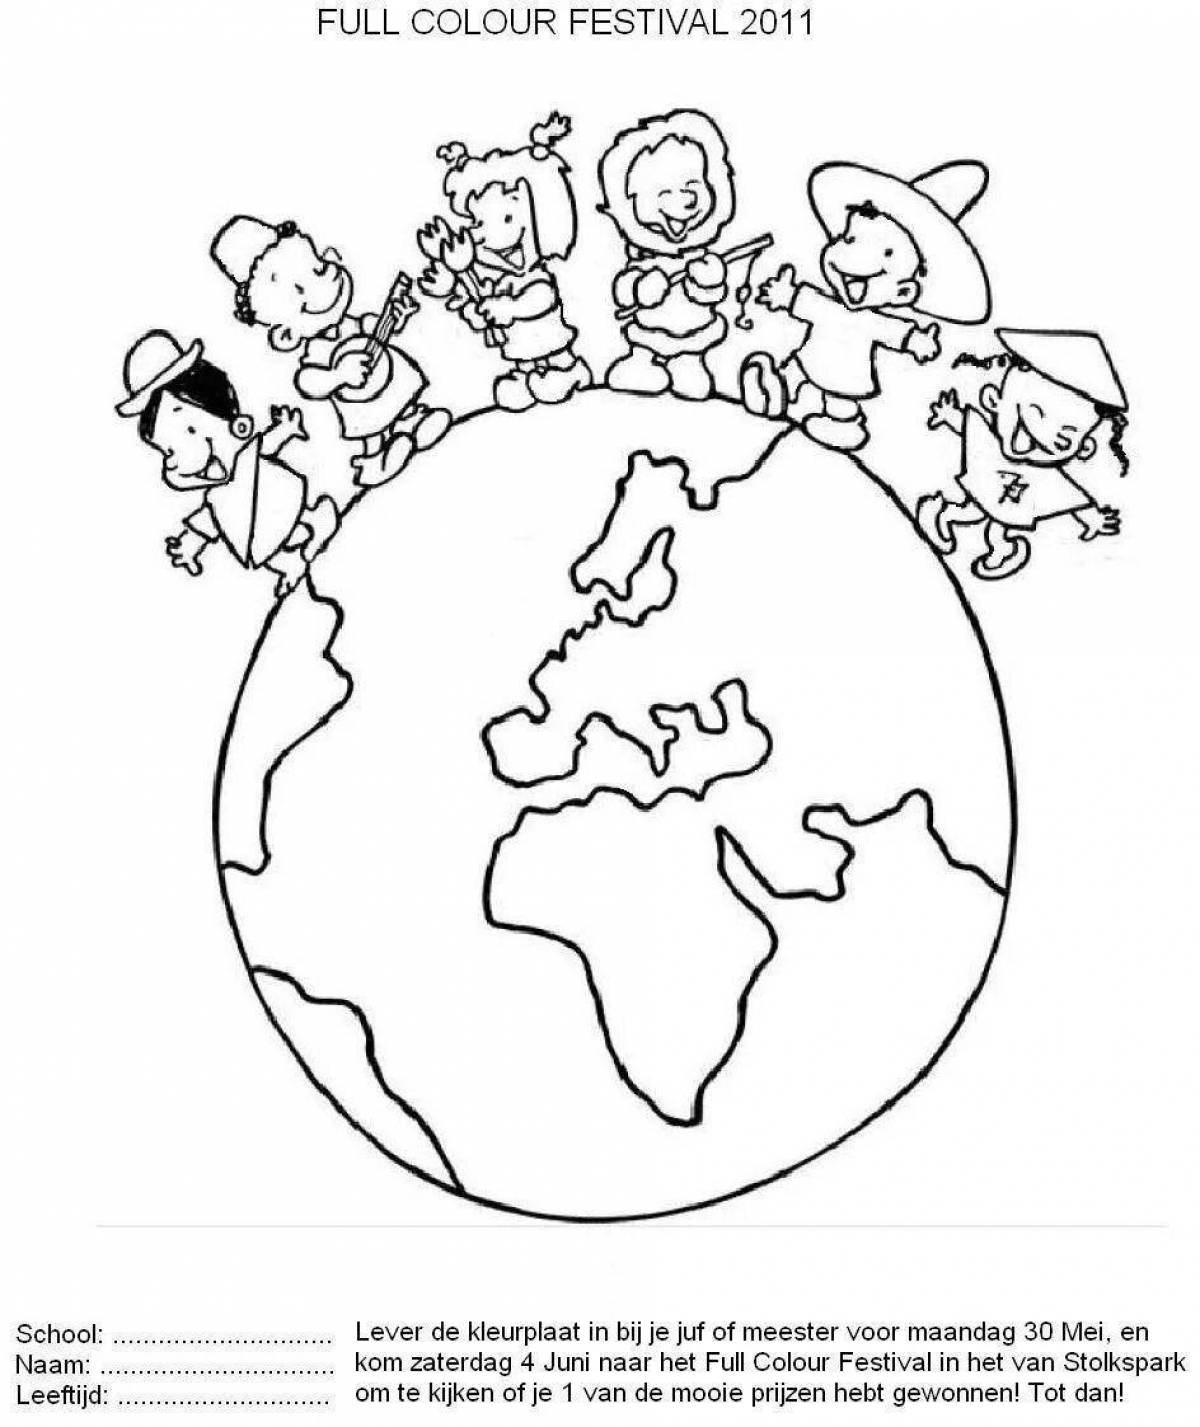 Majestic world on earth coloring page